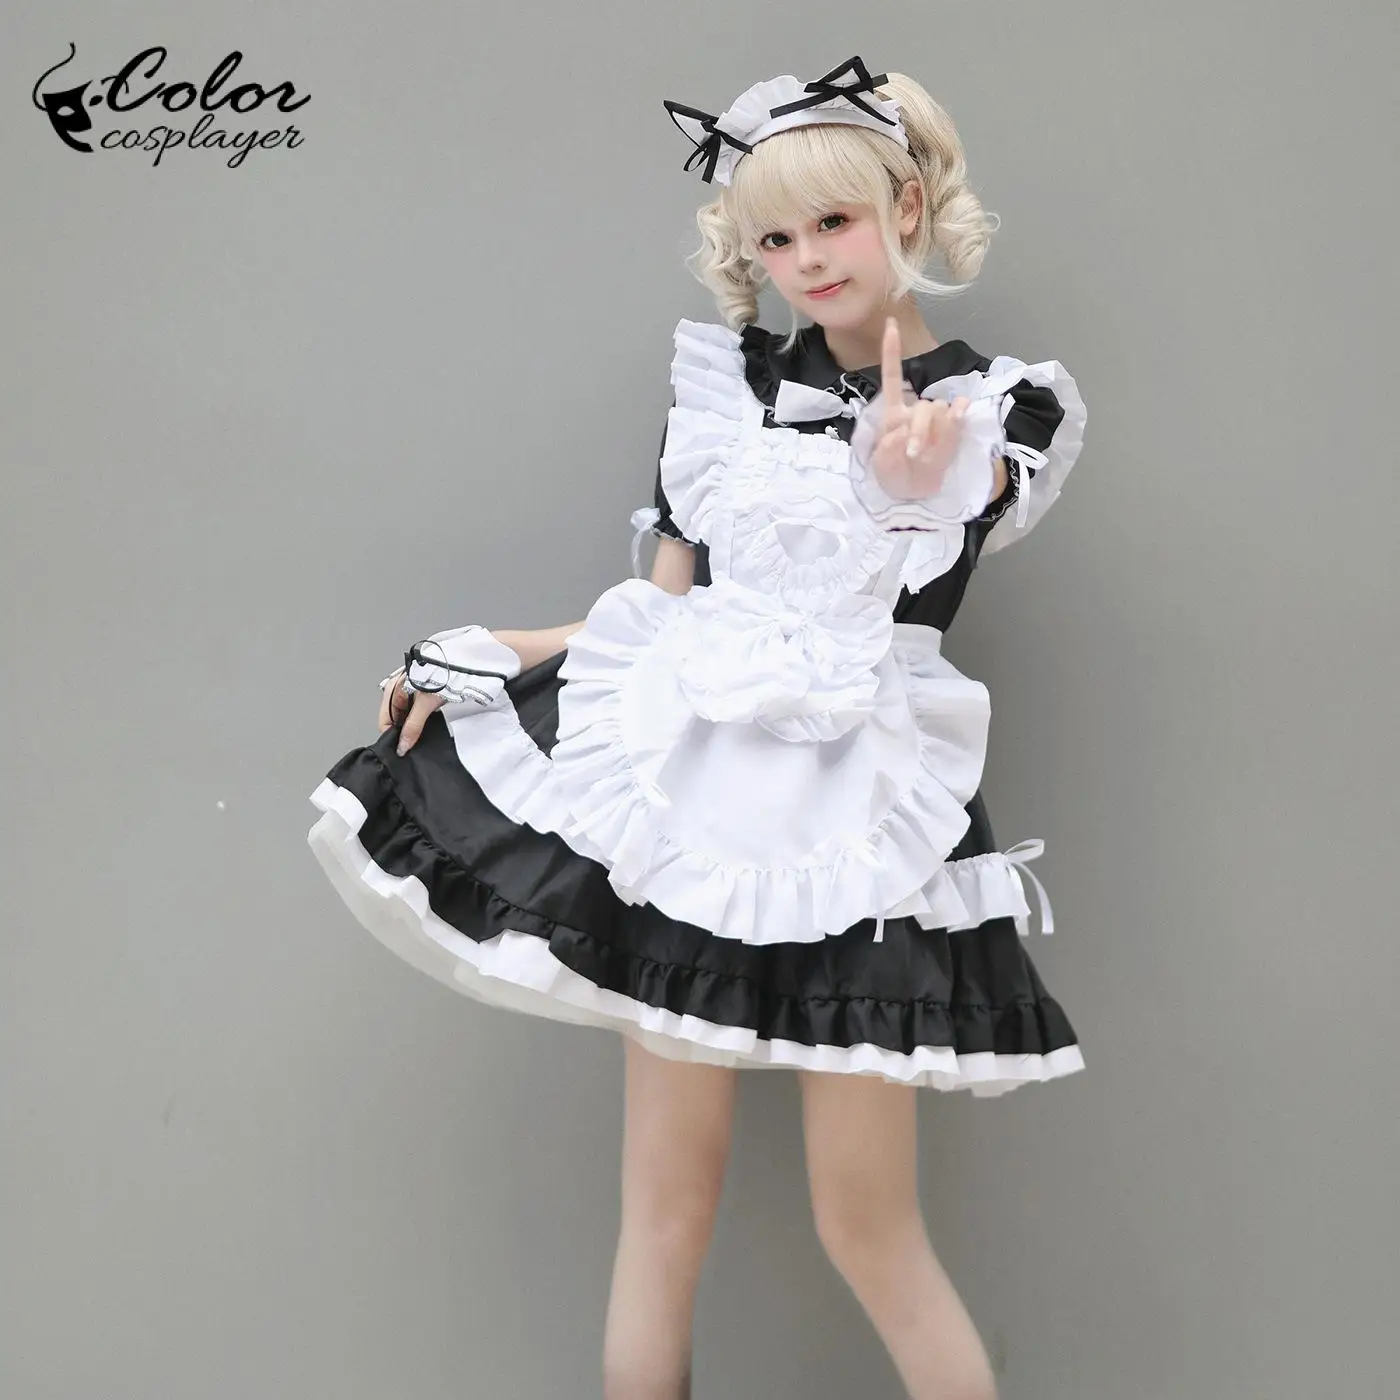 

Color Cosplayer Maid Cosplay Dress Lolita Suit Bow Dress Up Anime Servant Cos Costume Cafe Uniform Women Halloween Clothing